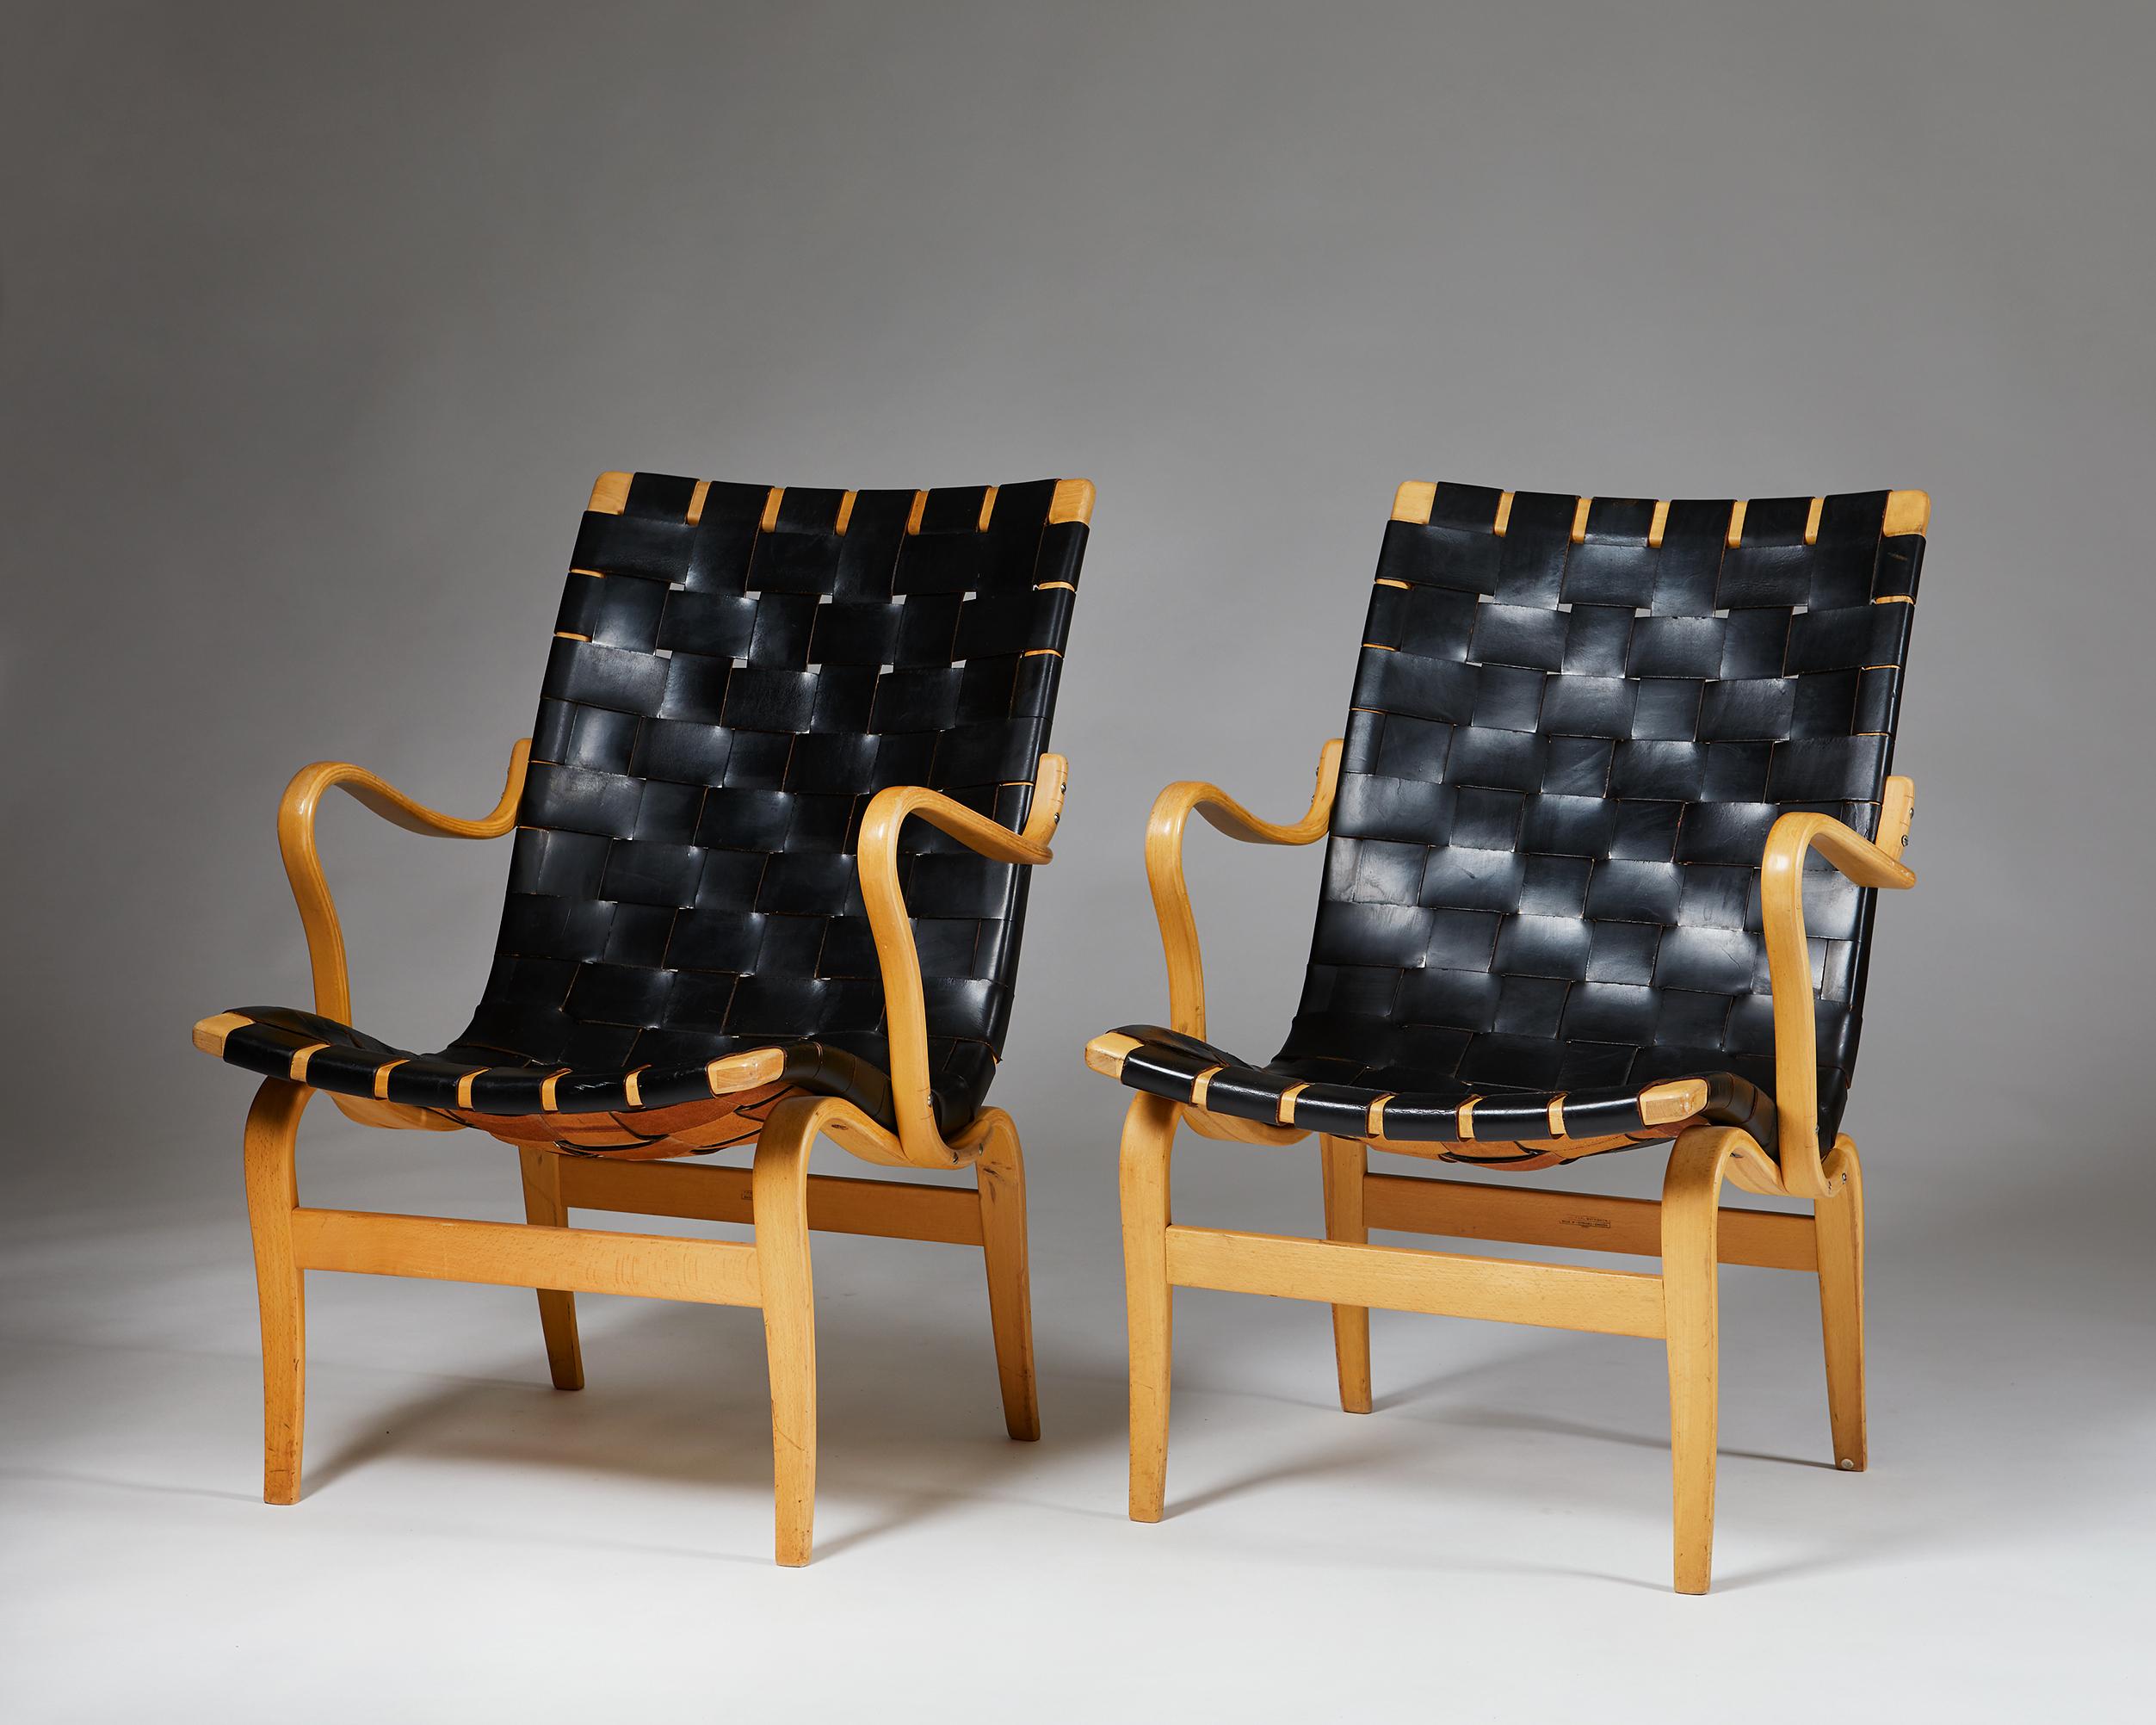 Pair of armchairs Eva designed by Bruno Mathsson for K. Mathsson, 
Sweden, 1960s.

Wreathed leather seat on a beech bentwood frame.

Measures: H: 84 cm/ 2' 9 1/2